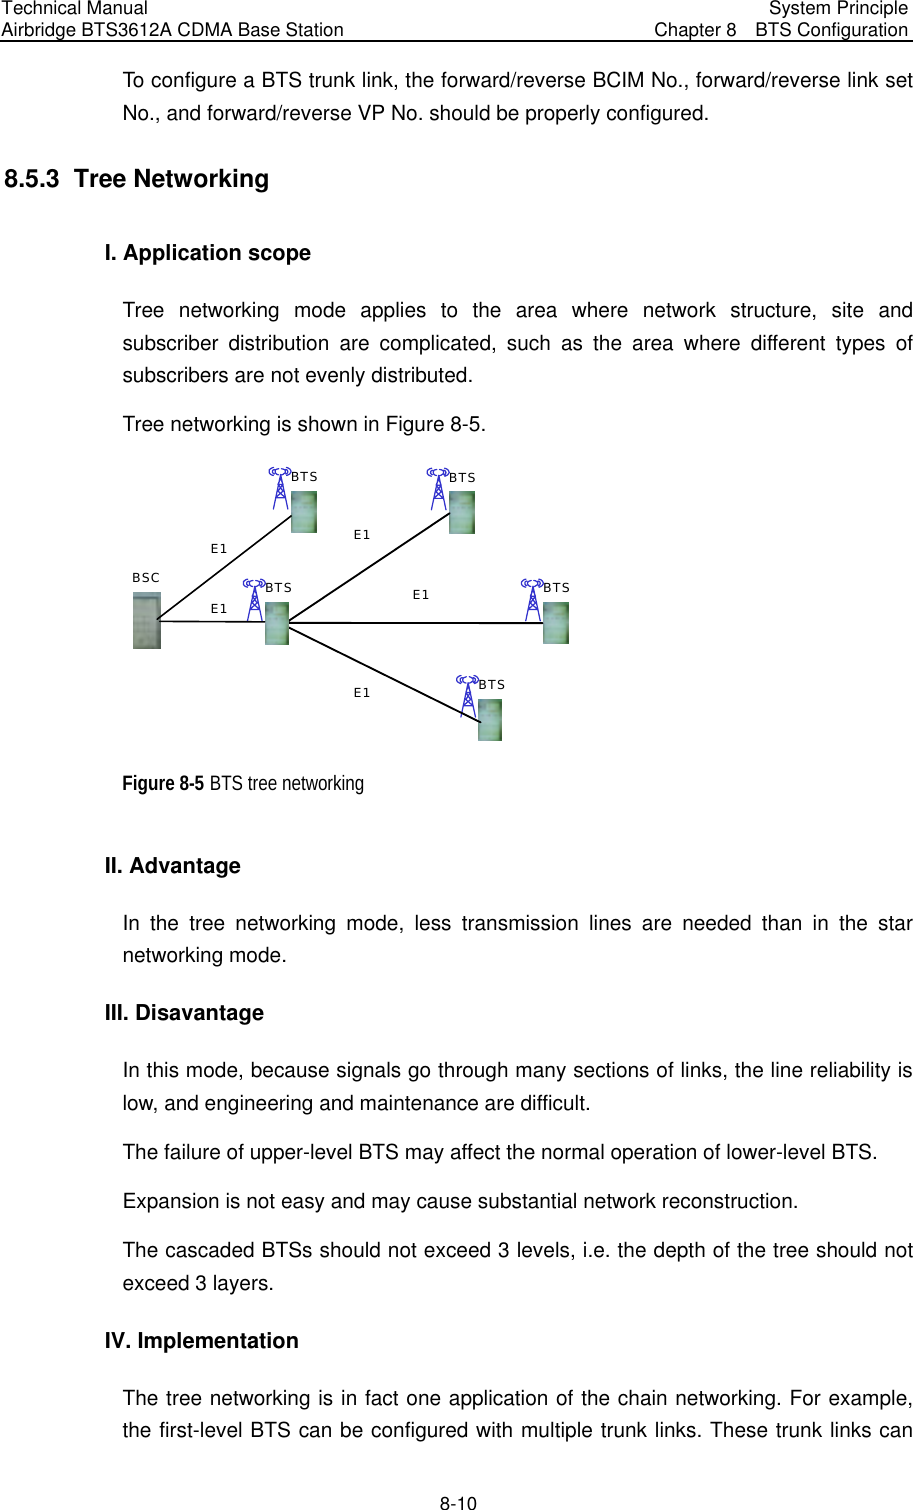 Technical Manual Airbridge BTS3612A CDMA Base Station  System Principle Chapter 8  BTS Configuration  8-10 To configure a BTS trunk link, the forward/reverse BCIM No., forward/reverse link set No., and forward/reverse VP No. should be properly configured. 8.5.3  Tree Networking I. Application scope Tree networking mode applies to the area where network structure, site and subscriber distribution are complicated, such as the area where different types of subscribers are not evenly distributed.   Tree networking is shown in Figure 8-5. BSCBTSBTSBTSE1E1E1BTSBTSE1E1 Figure 8-5 BTS tree networking II. Advantage In the tree networking mode, less transmission lines are needed than in the star networking mode. III. Disavantage In this mode, because signals go through many sections of links, the line reliability is low, and engineering and maintenance are difficult. The failure of upper-level BTS may affect the normal operation of lower-level BTS. Expansion is not easy and may cause substantial network reconstruction. The cascaded BTSs should not exceed 3 levels, i.e. the depth of the tree should not exceed 3 layers. IV. Implementation The tree networking is in fact one application of the chain networking. For example, the first-level BTS can be configured with multiple trunk links. These trunk links can 